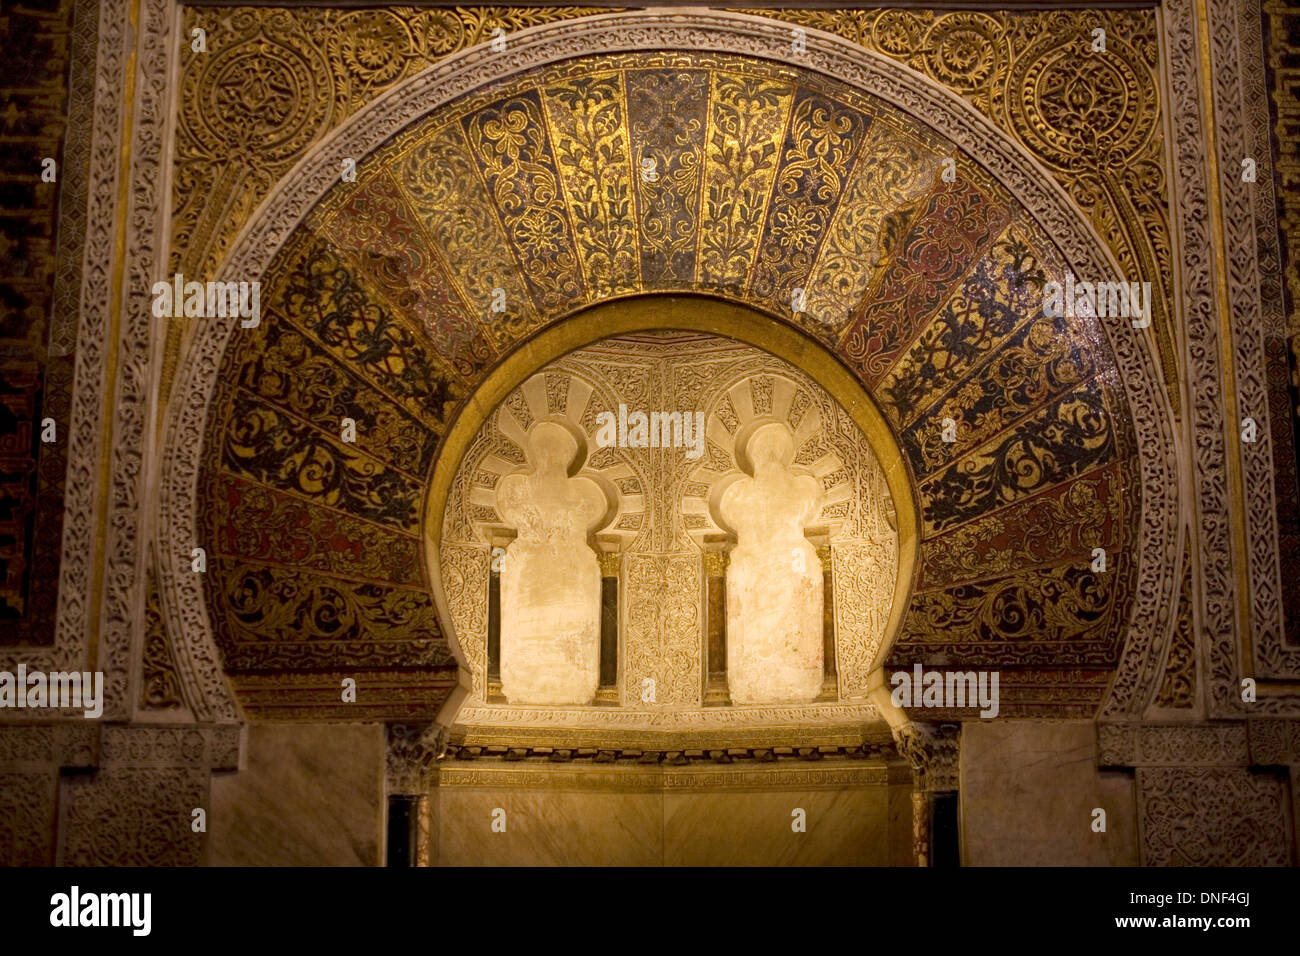 The horseshoe arch of the Mirhab of the Mosque-Cathedral of Cordoba, Andalusia, Spain, April 18, 2011. Stock Photo